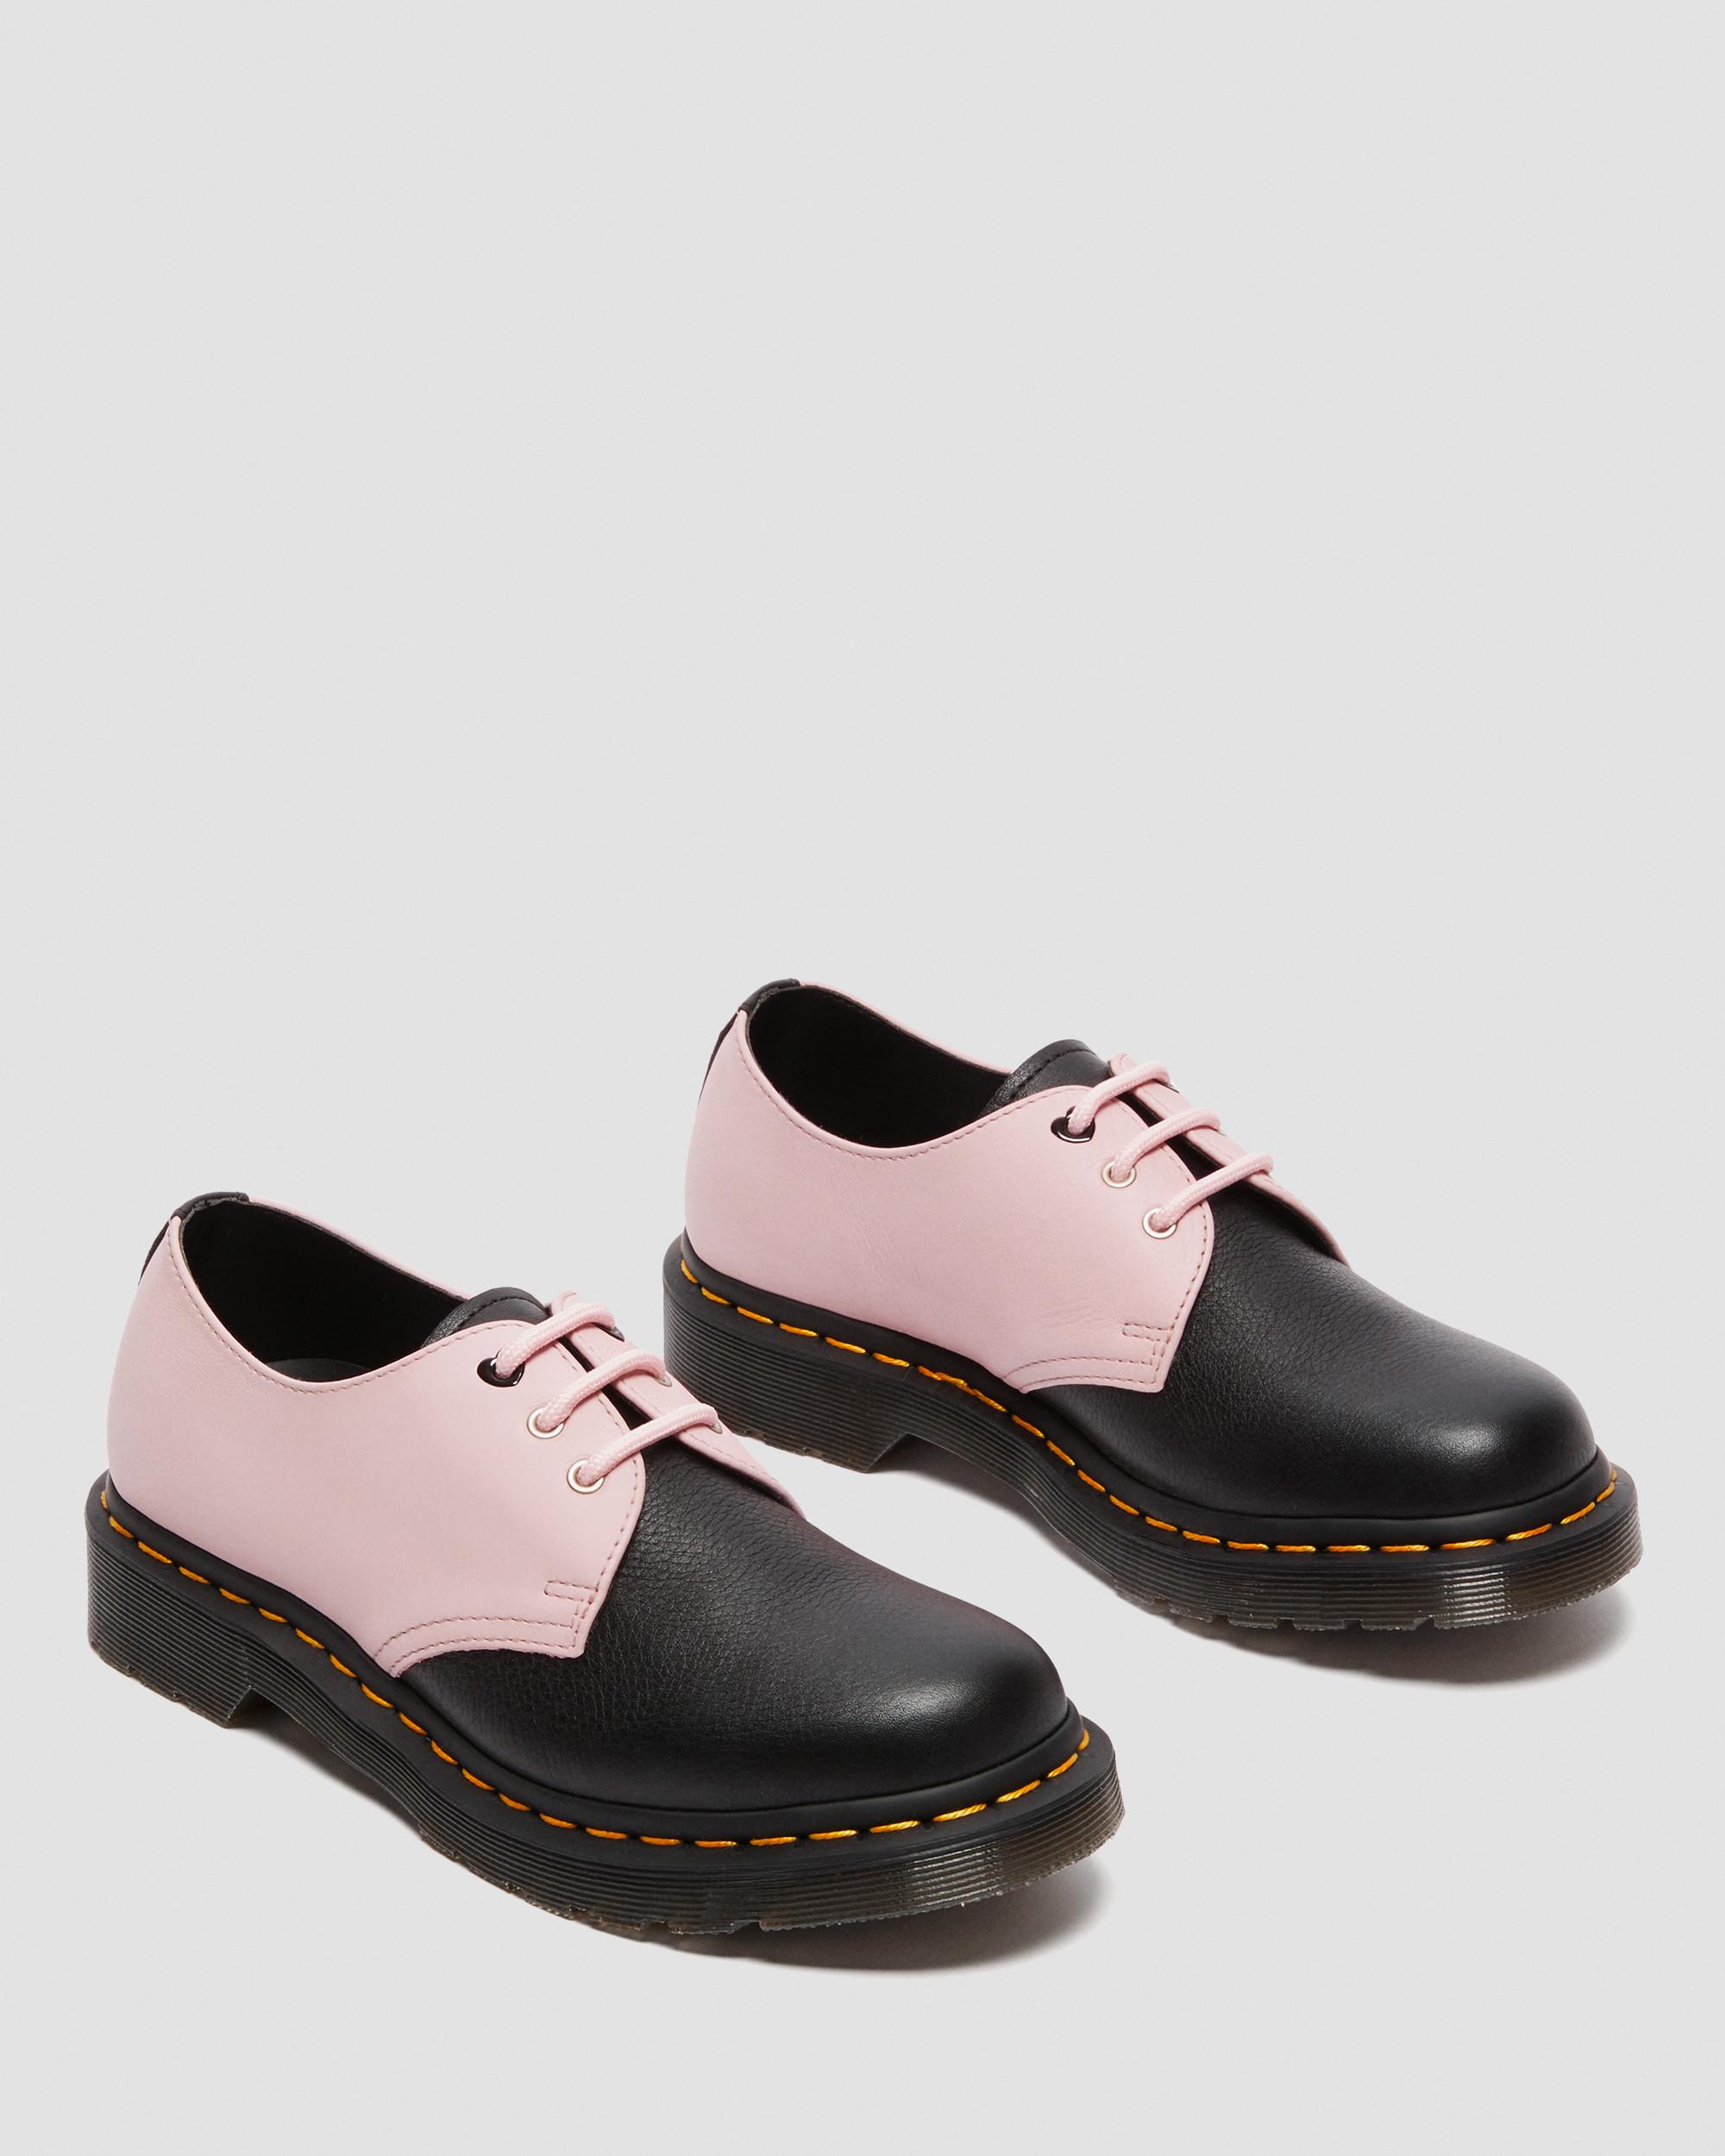 1461 Contrast Virginia Leather Oxford Shoes | Dr. Martens